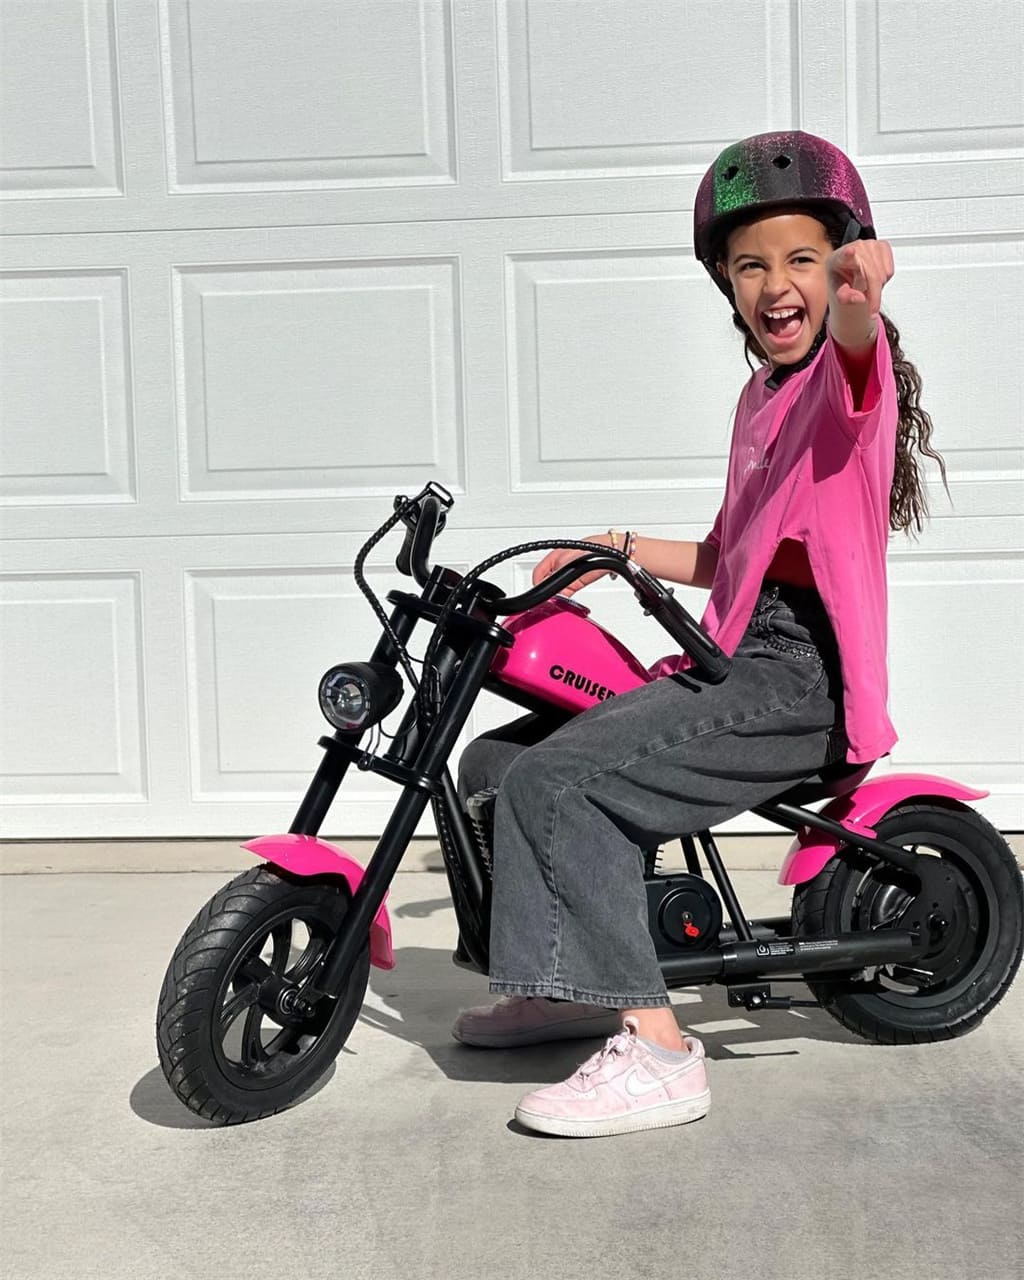 Women in Motorcycling: Empowering Girls Through Riding from a Young Age